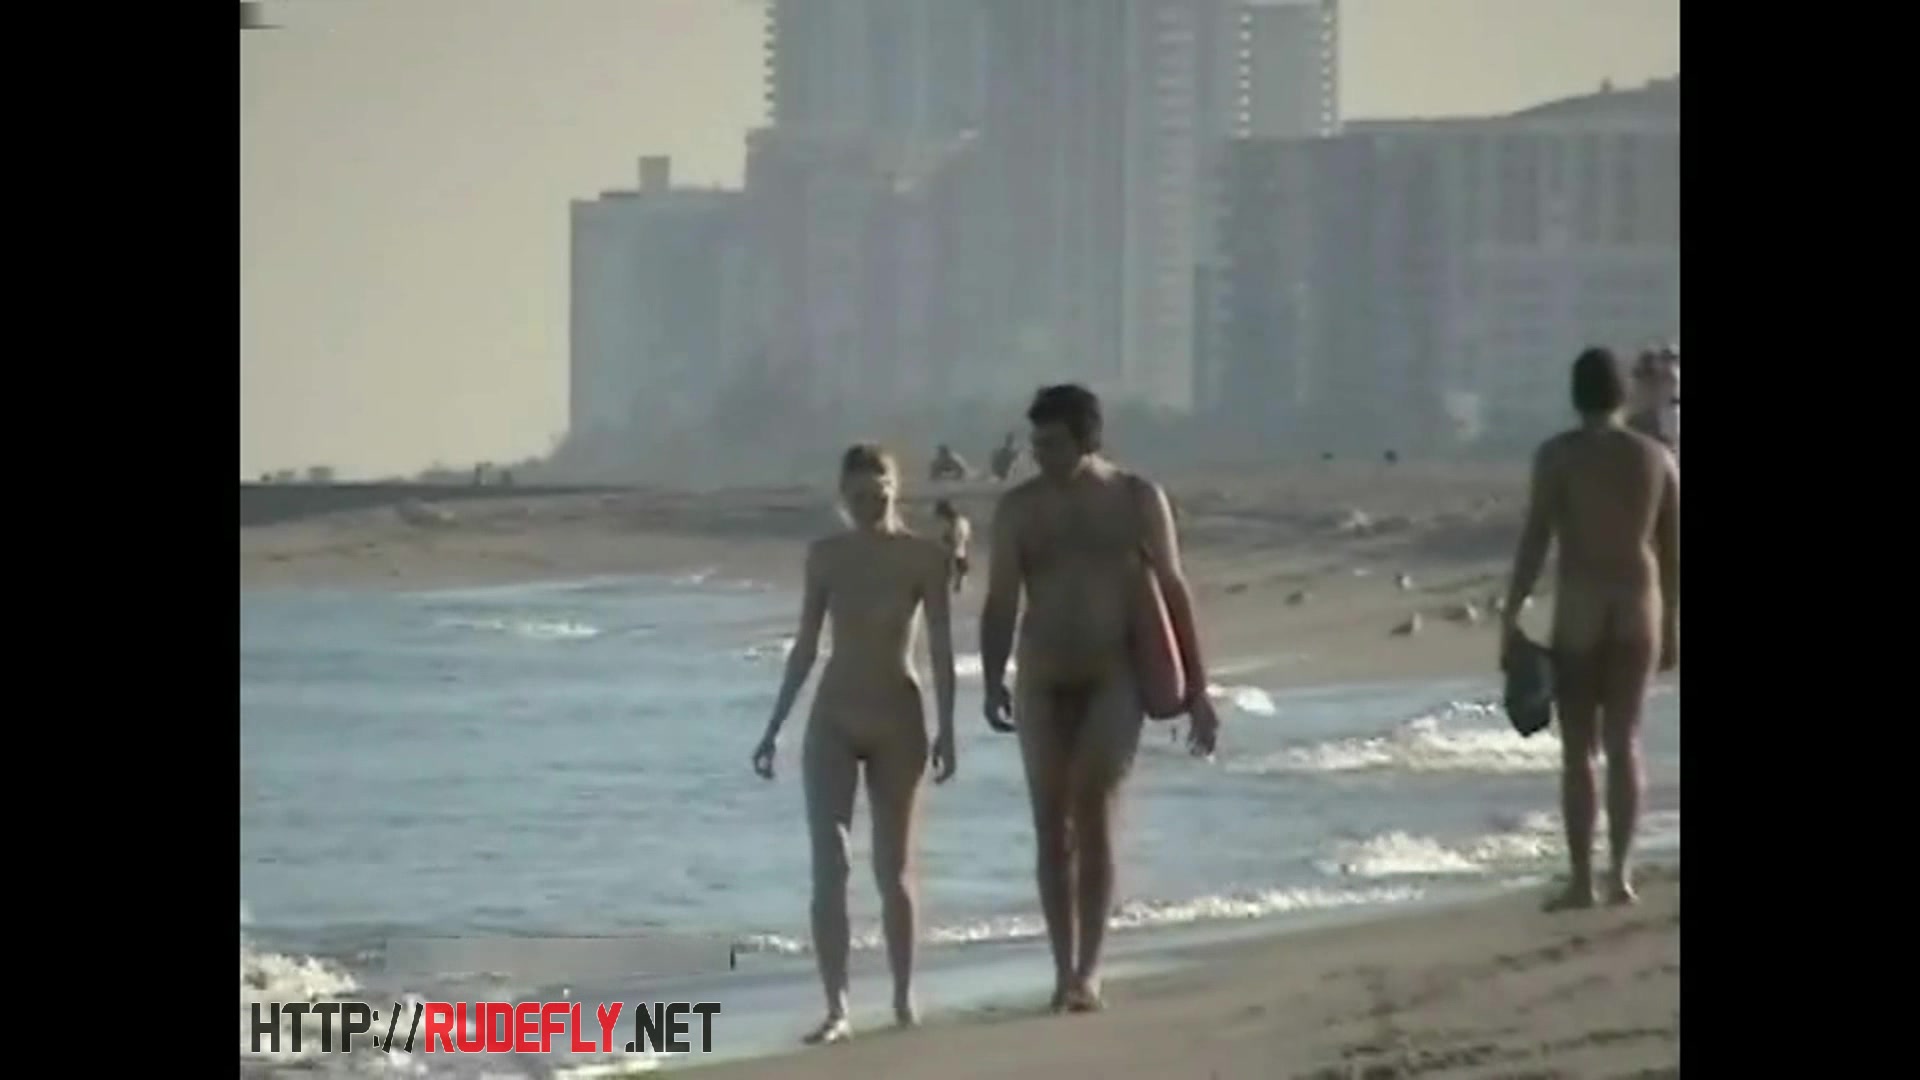 Peeping at a hot nudist couple on the beach